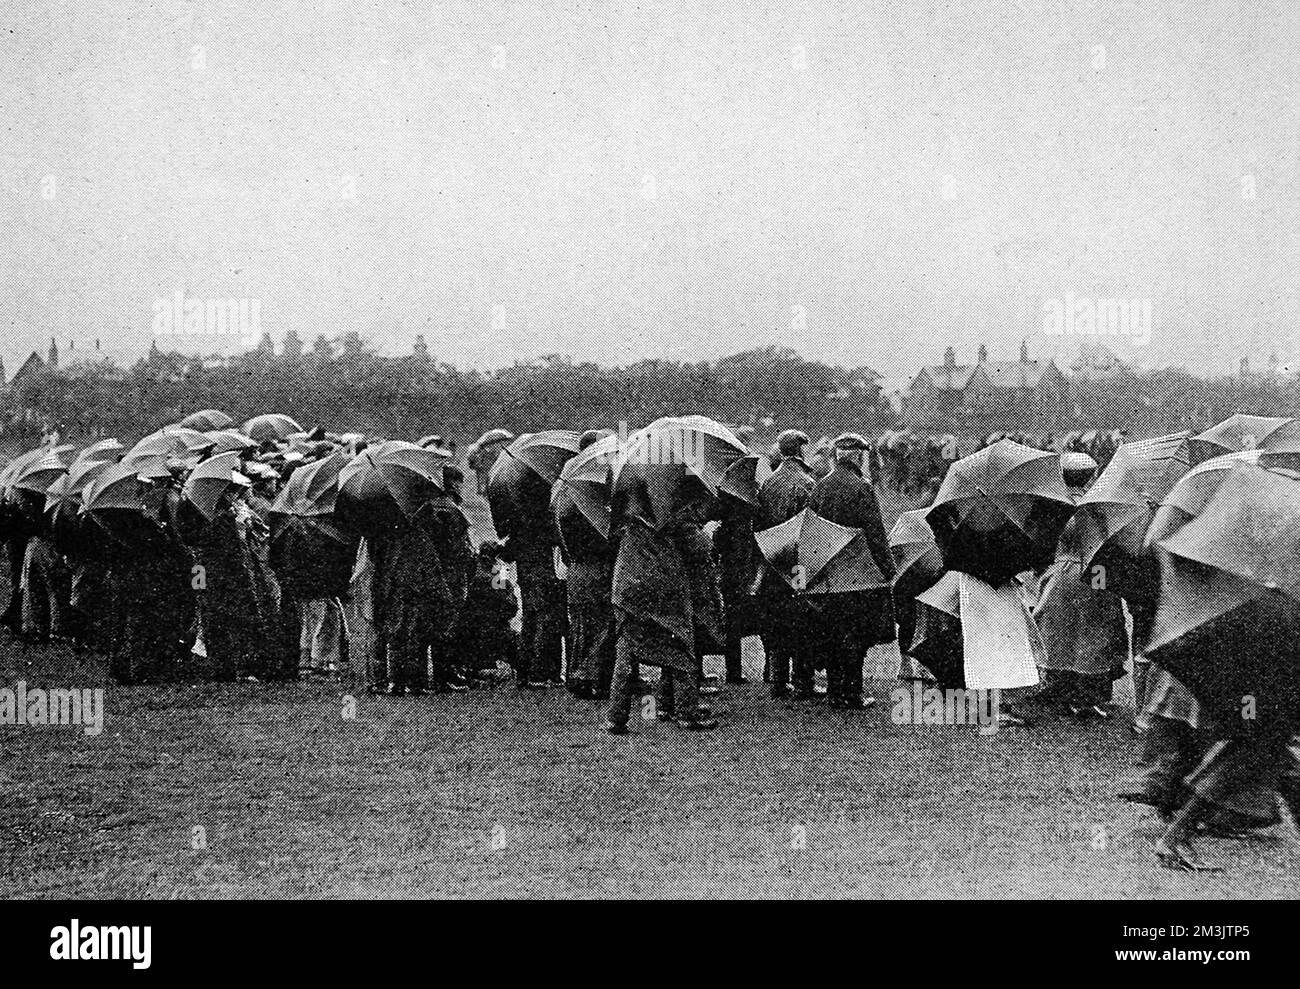 Photograph of the crowd at the Golf Amateur Championship at Hoylake, May 1906.  Rain and strong winds combined to make conditions unpleasant for the final round of Mr. James Robb and Mr. C.C. Lingen.     Date: 1906 Stock Photo